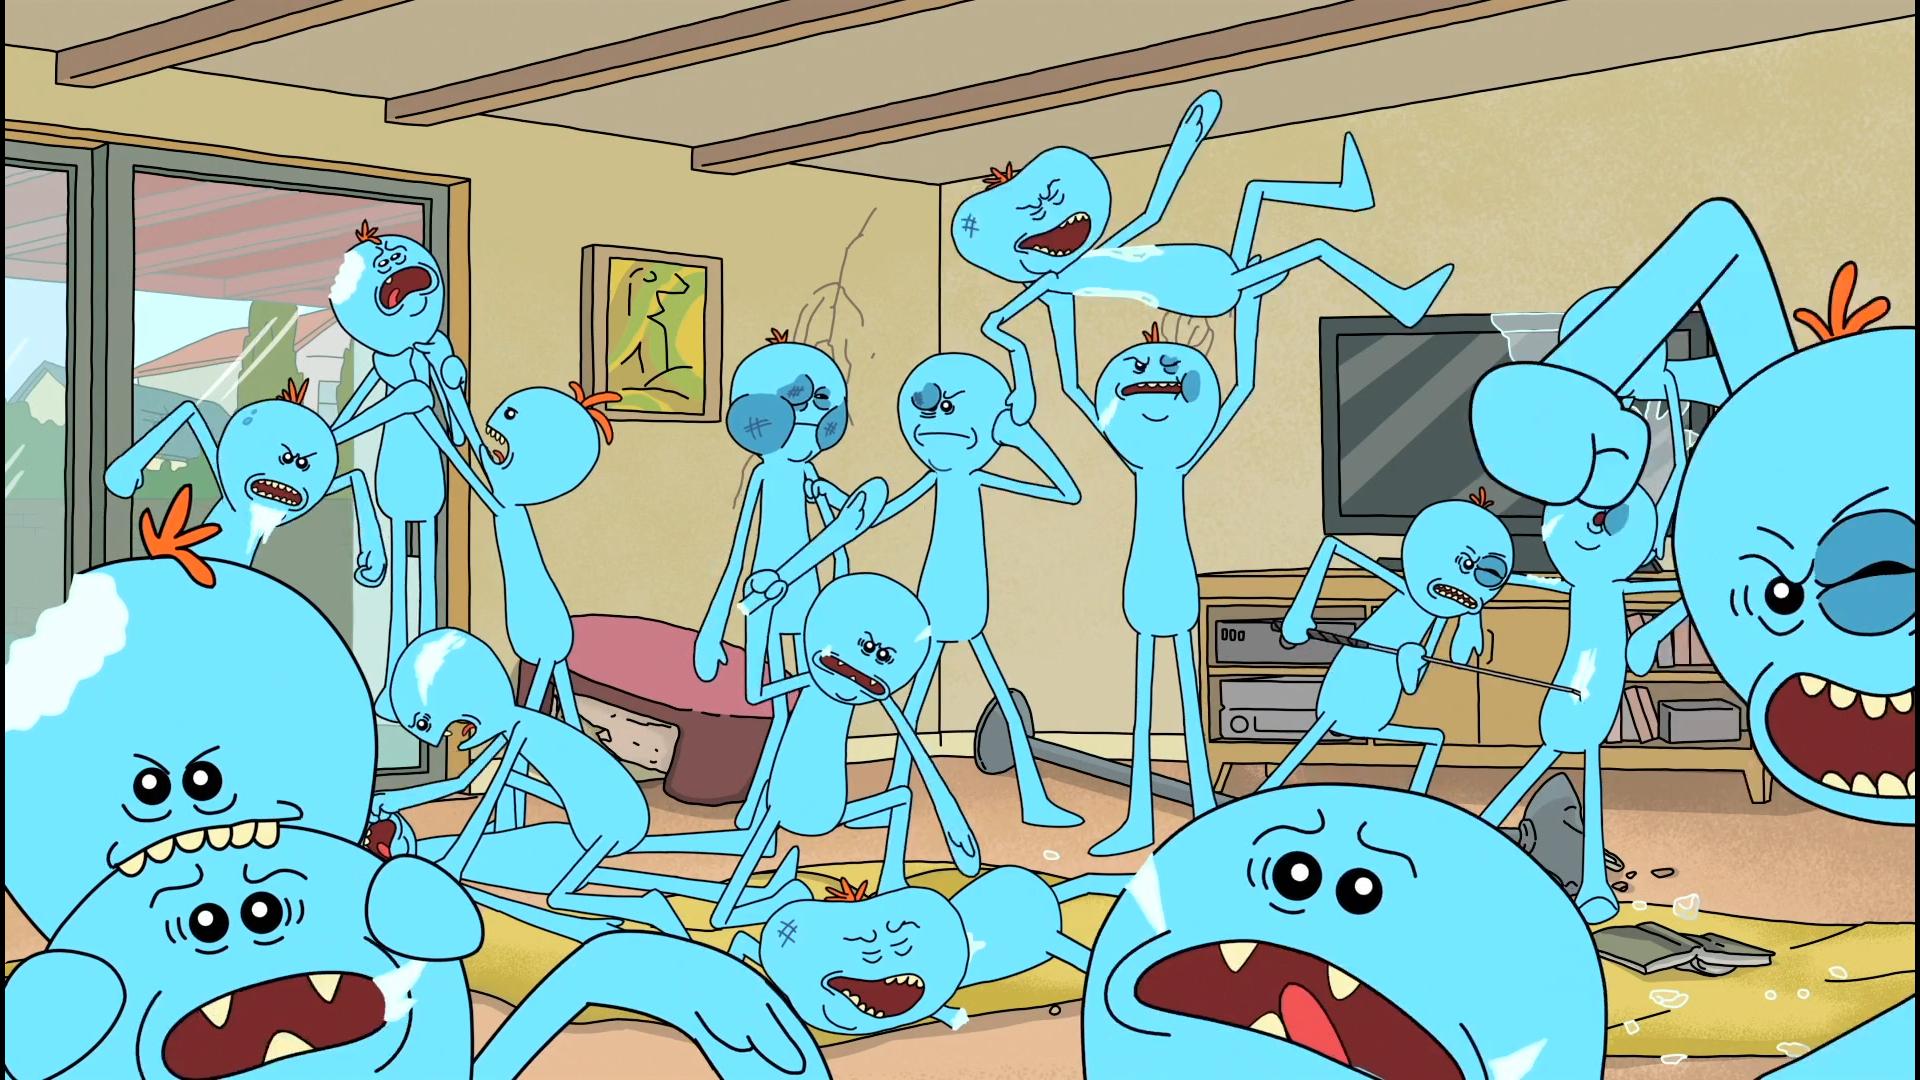 mr meeseeks (rick and morty), rick and morty, tv show